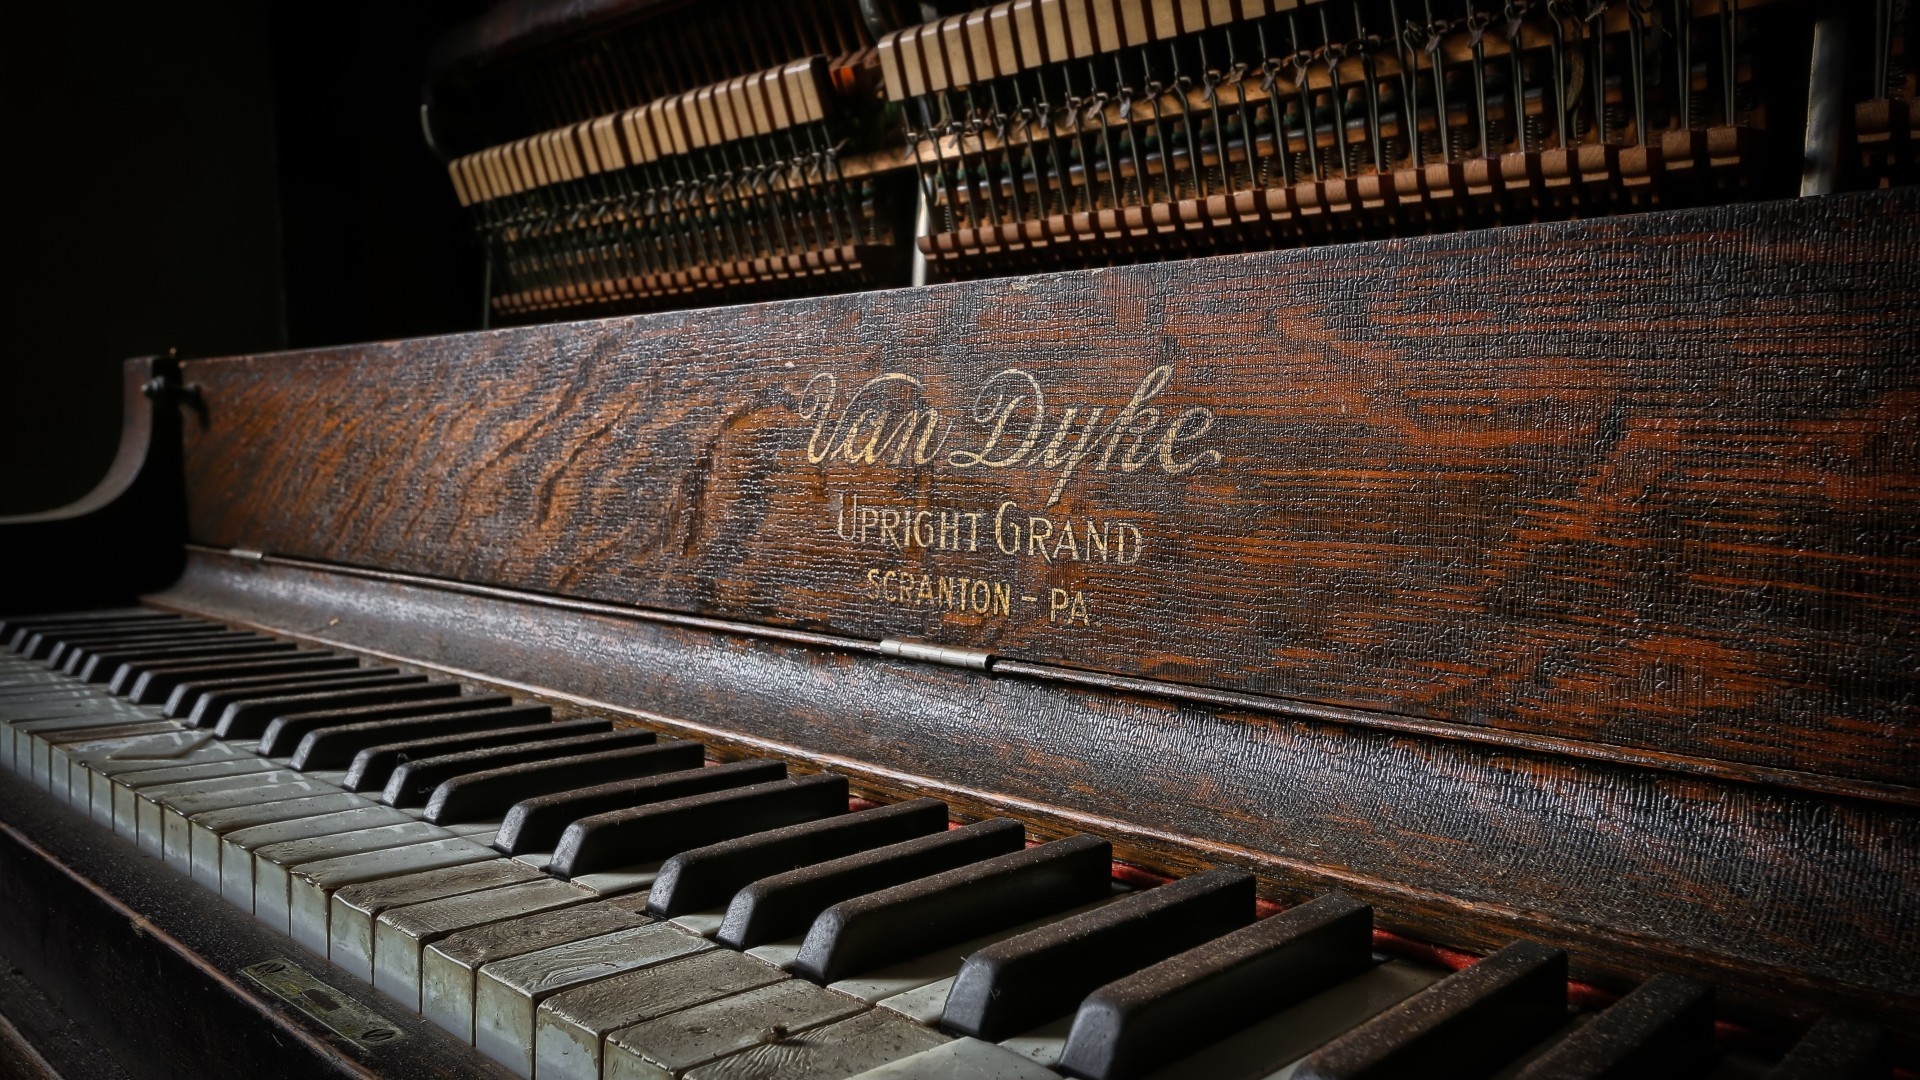 Grand Piano: Van Dyke, A wing-shaped keyboard musical instrument with horizontal strings. 1920x1080 Full HD Background.